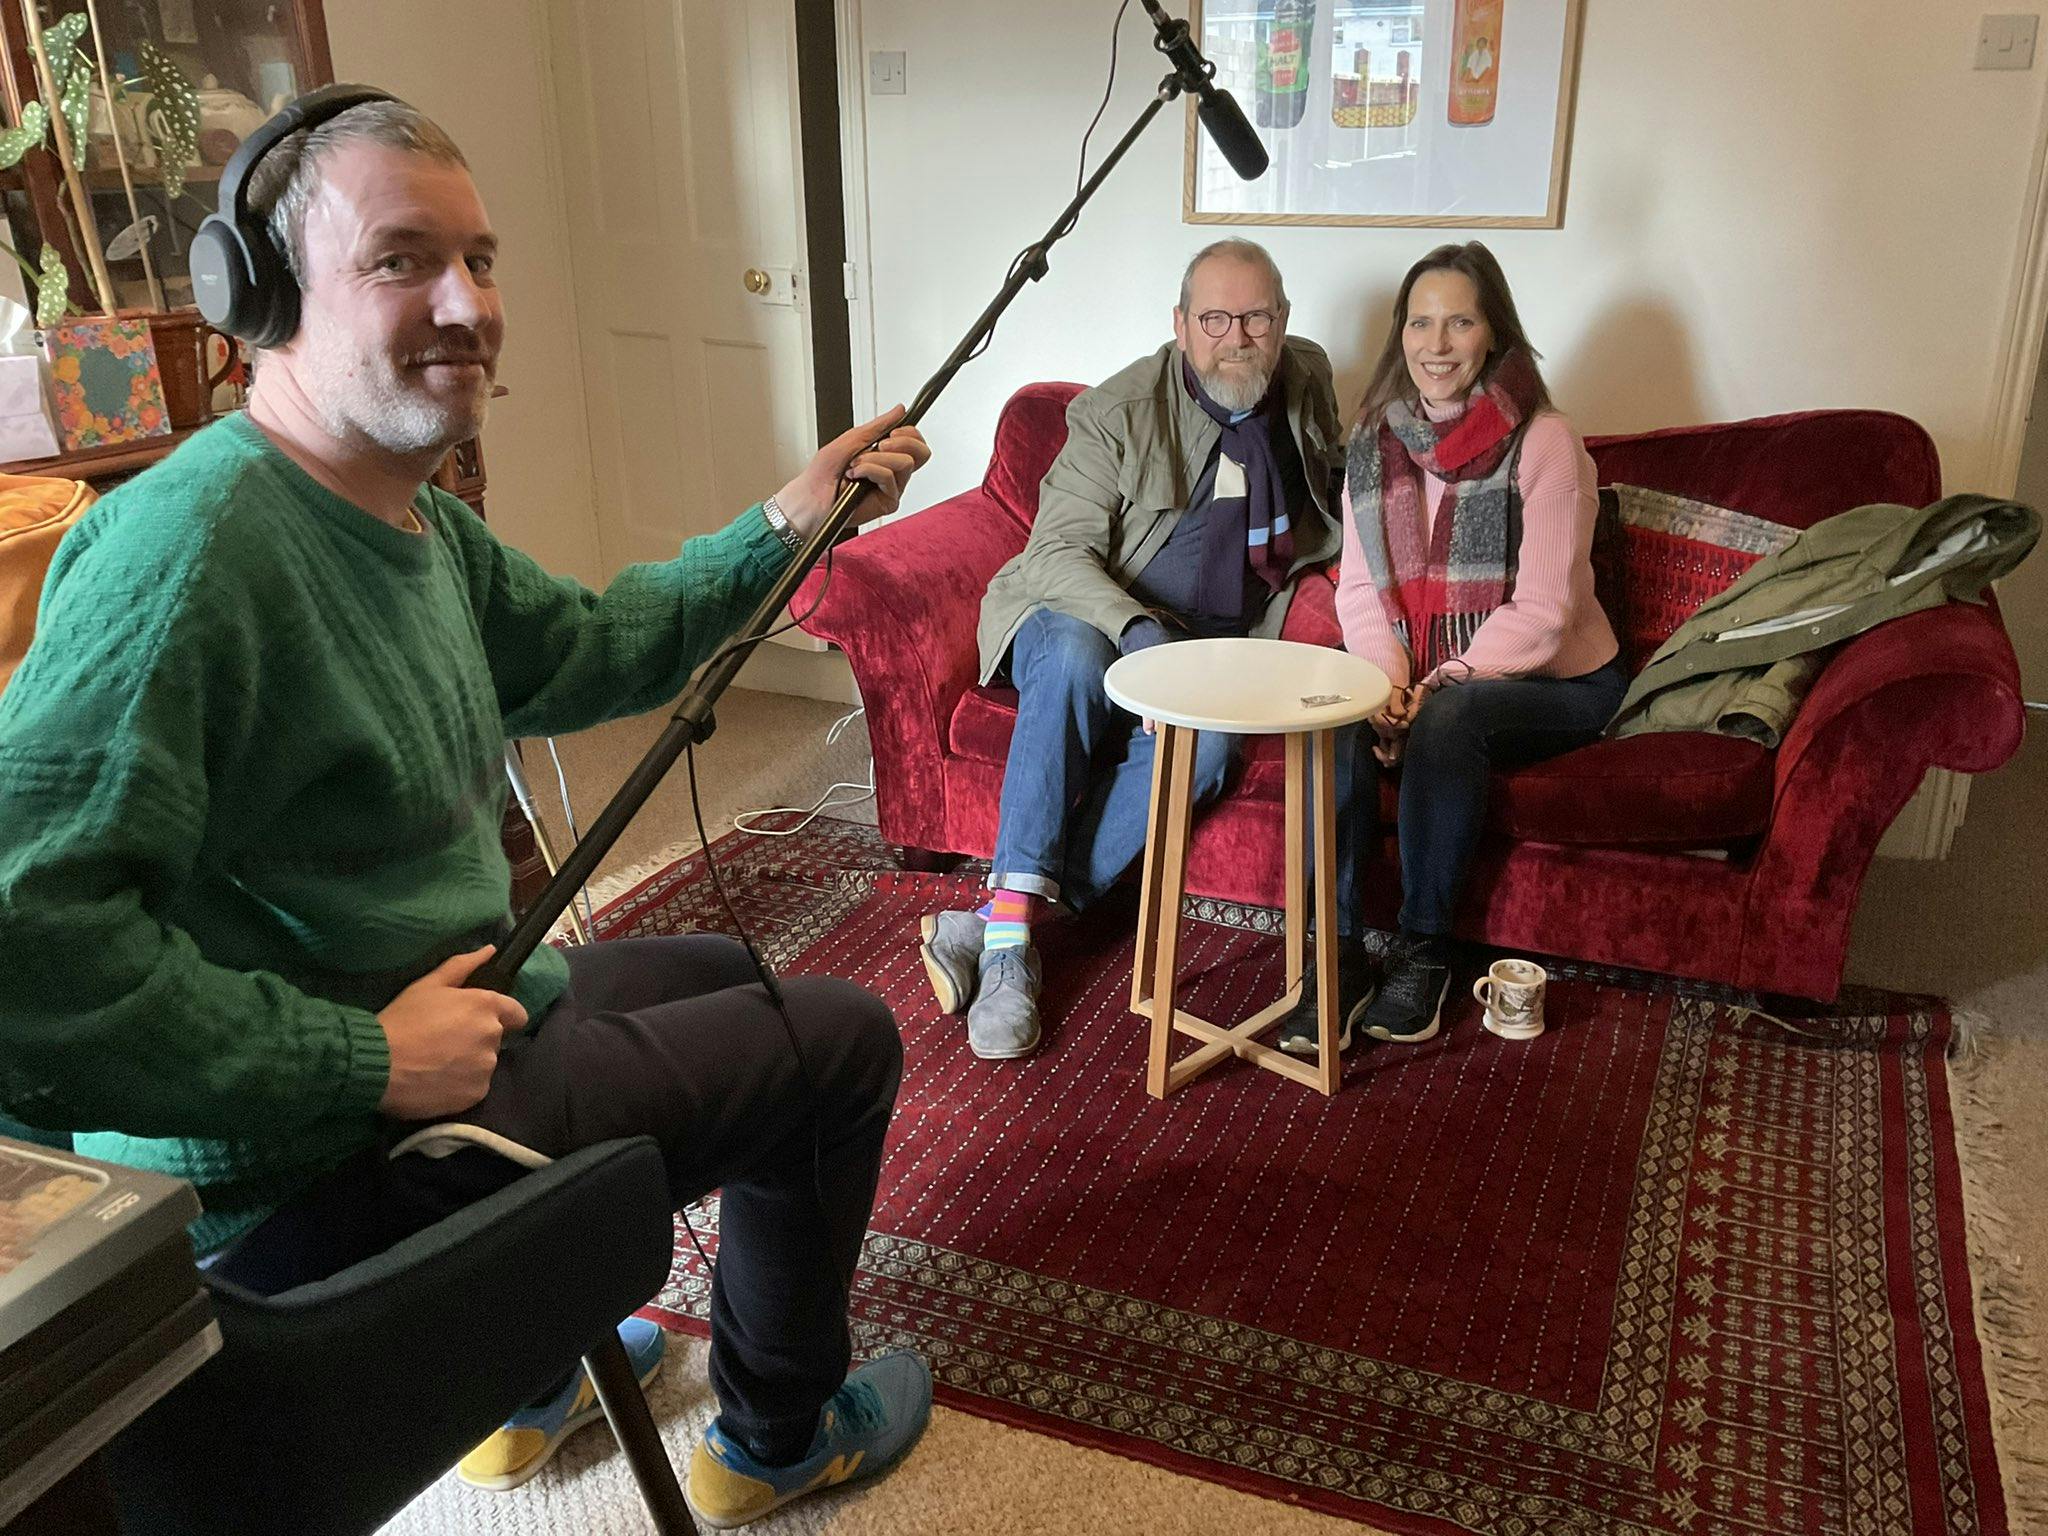 Andy Round recording voices with Claire Worboys and Johnathan Derby.